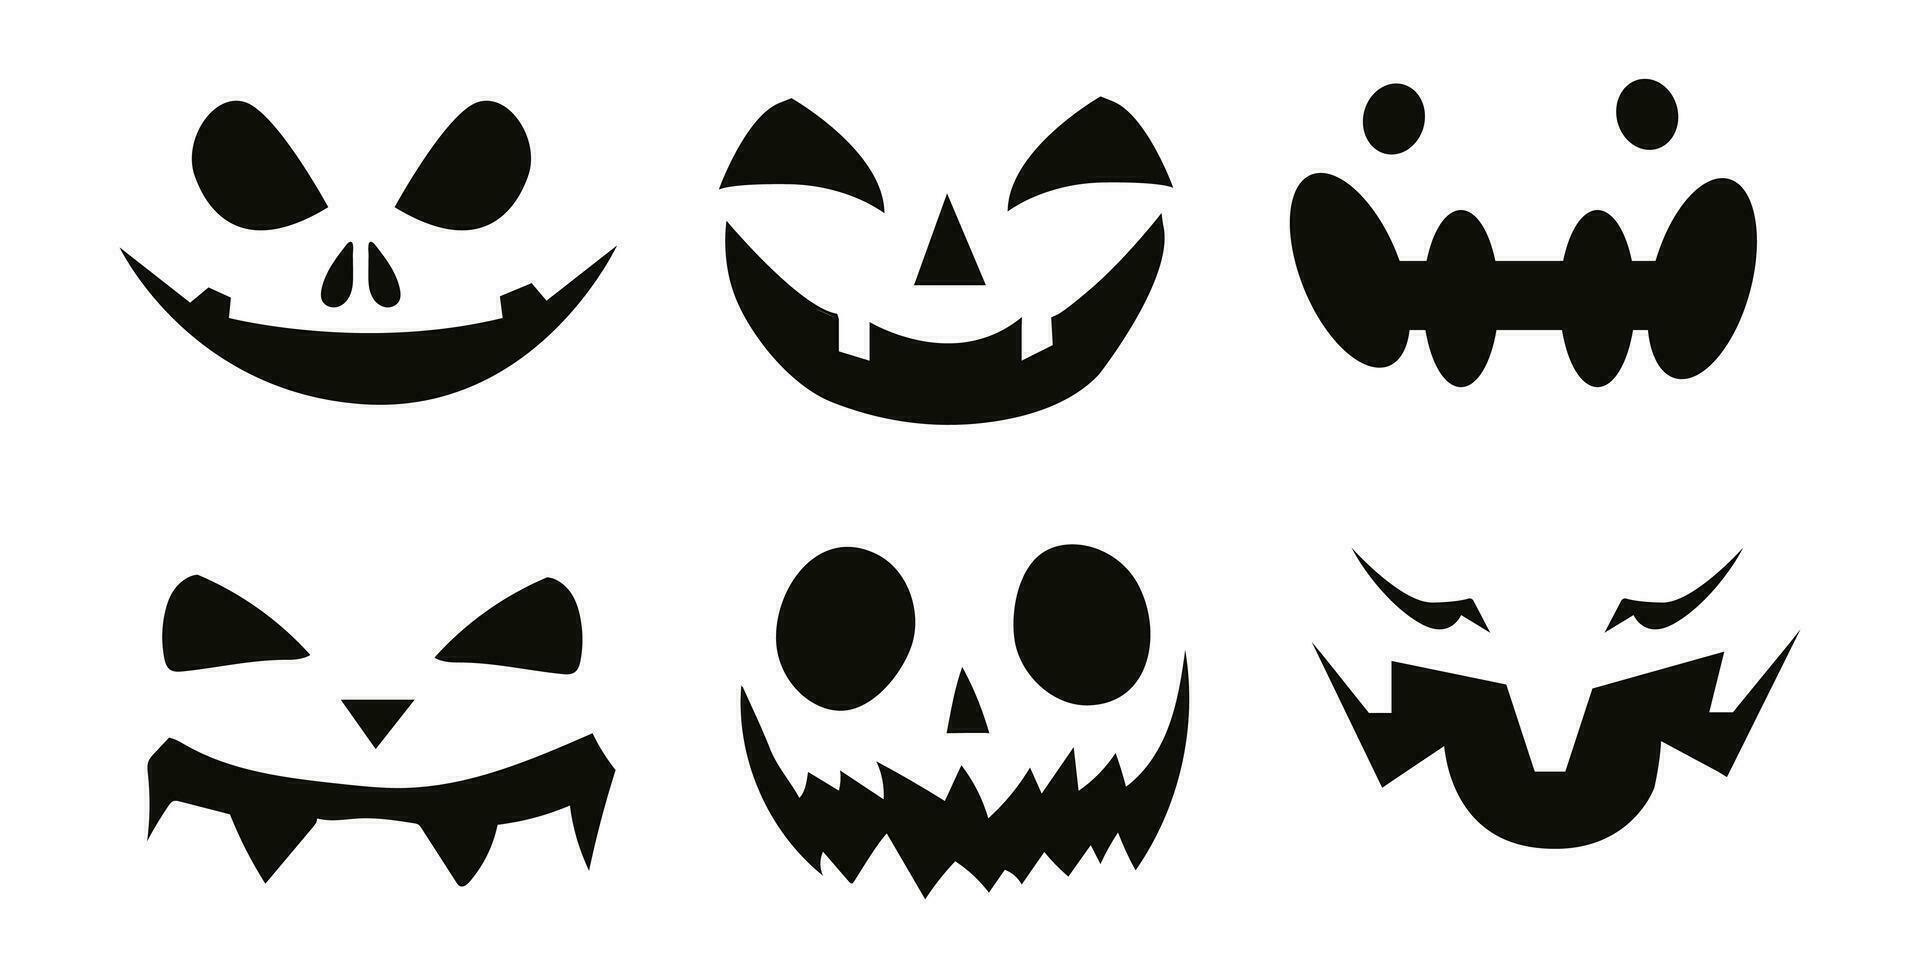 Pumpkins. Faces of pumpkins, Set of faces of patterns for pumpkins. Halloween, holiday. Autumn, season.  Silhouette, black shadow. Frightening, shadow theater. Template for cutting vector